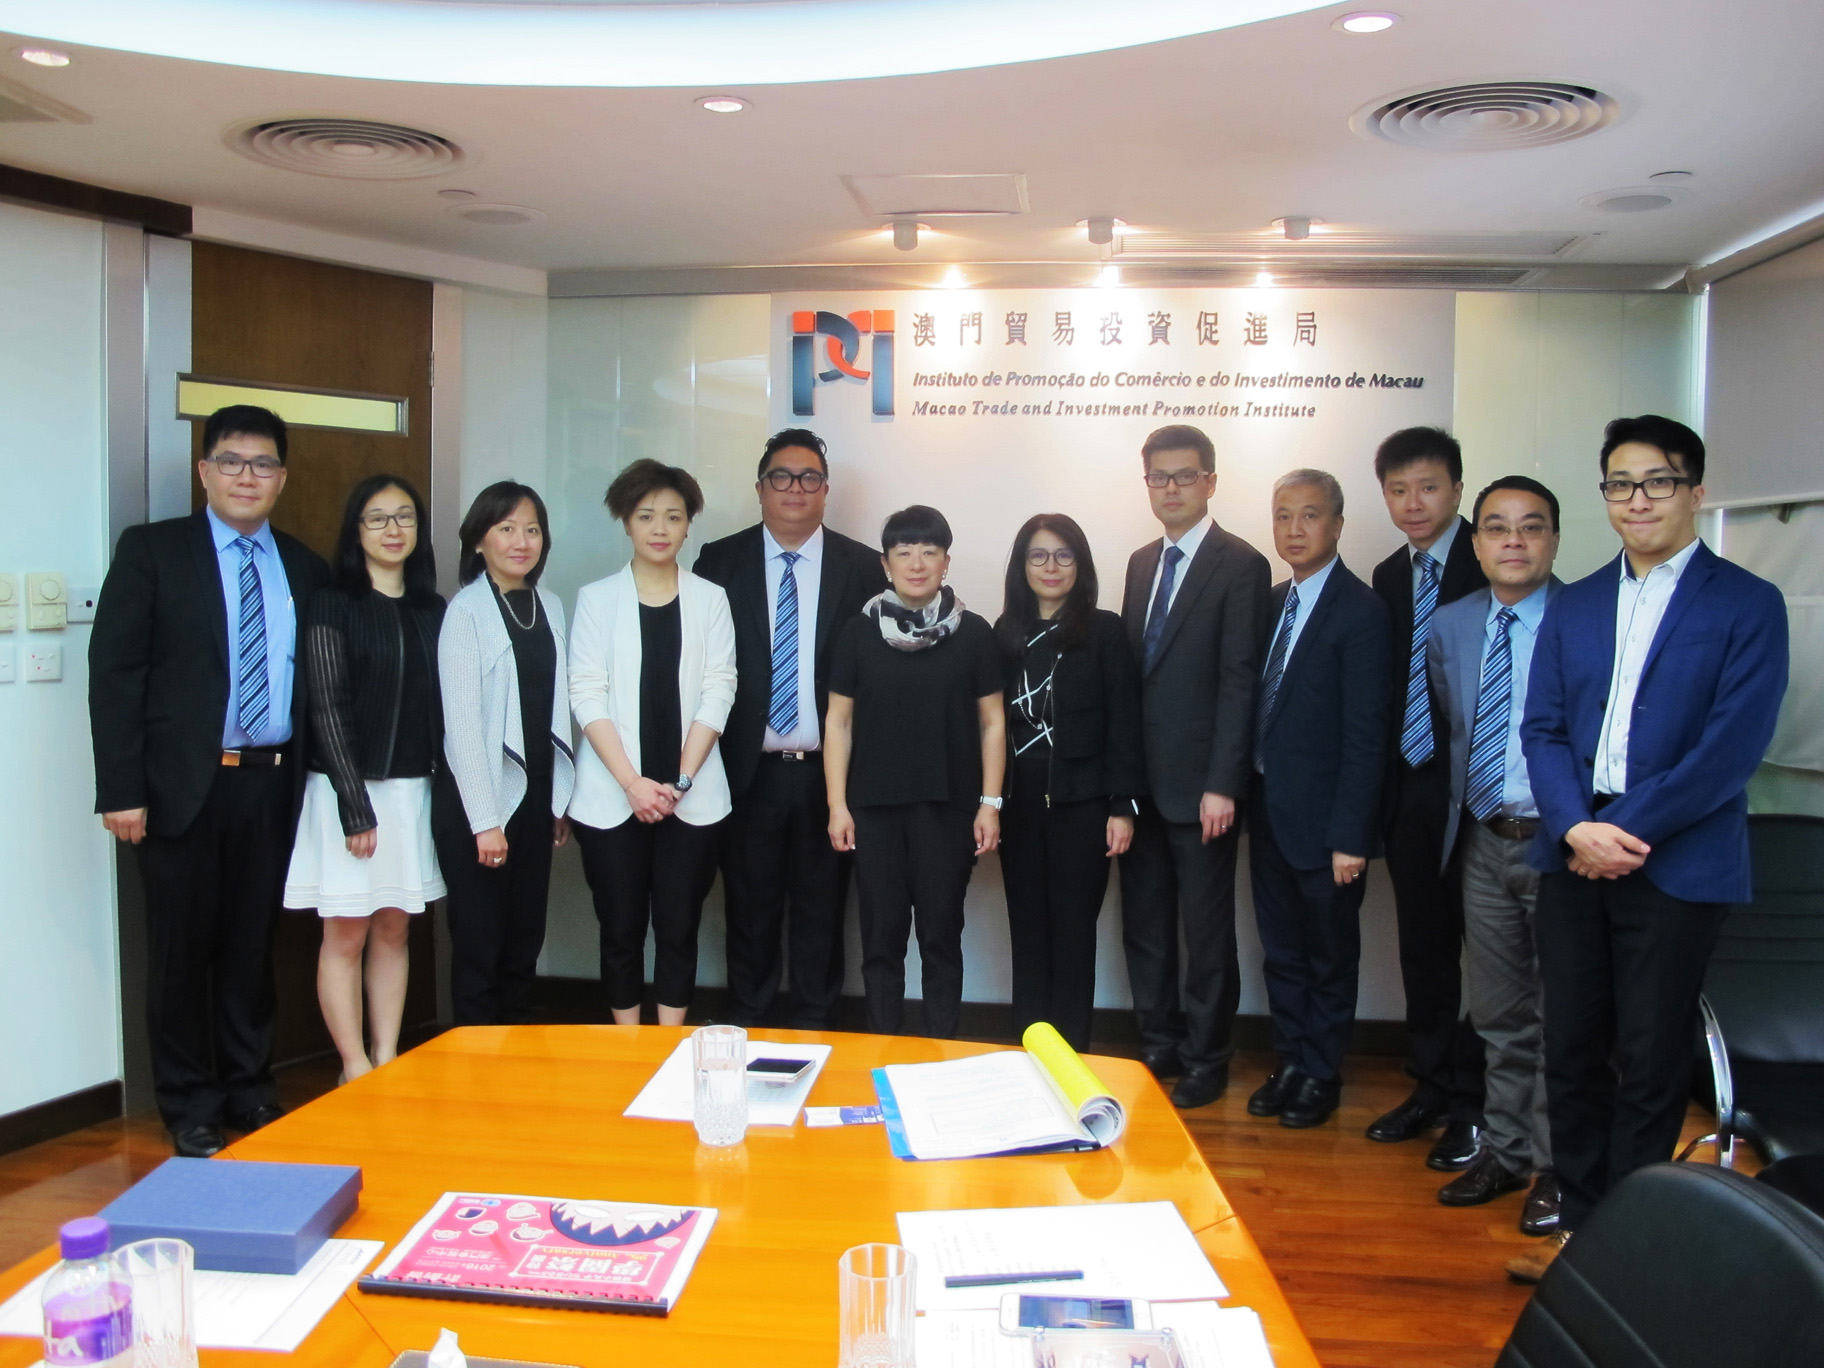 IPIM’s Executive Director Irene V. K. Lau with President of Association of Advertising Agents of Macau Lo Tak Chong and the delegation at IPIM (5 May 2016)